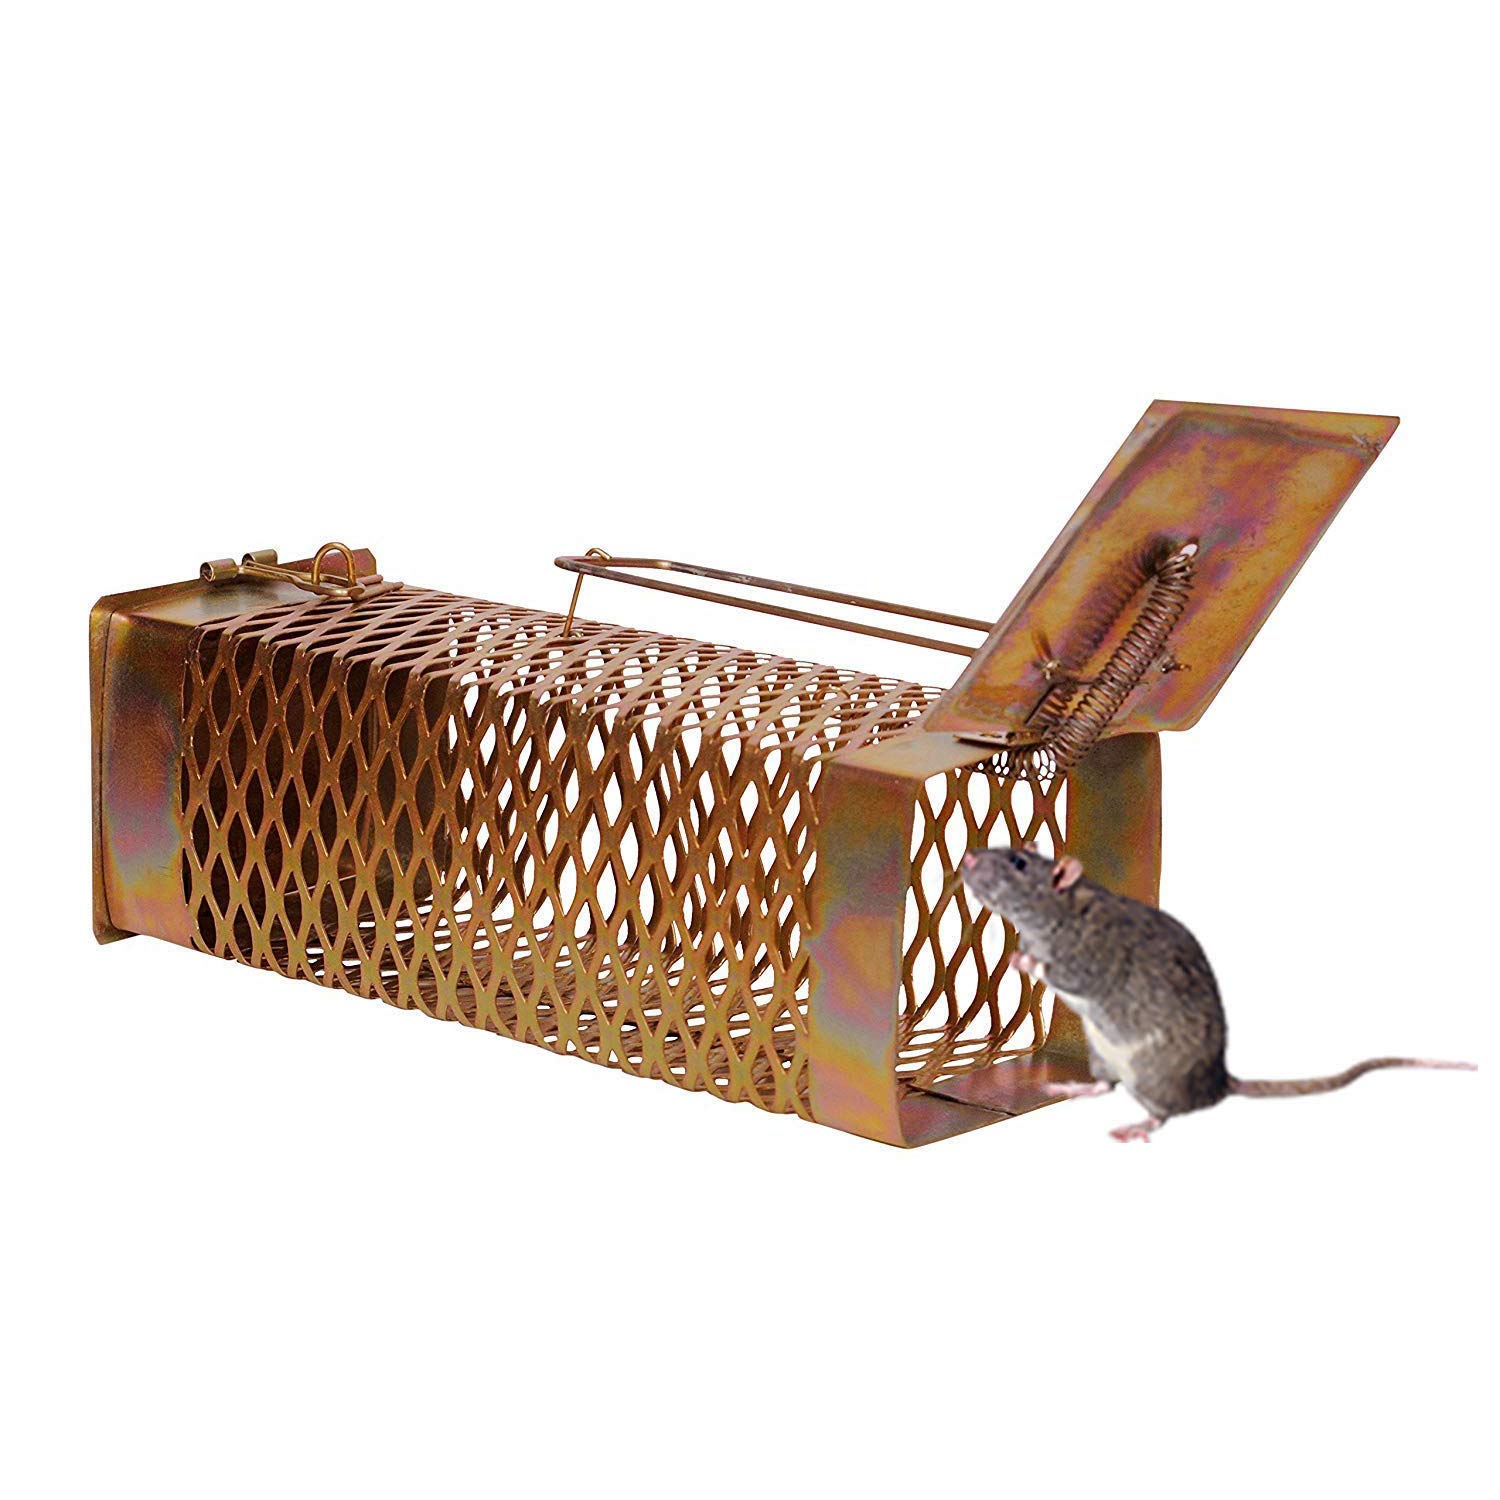 Humane Rat Traps Can Help Protect a Home